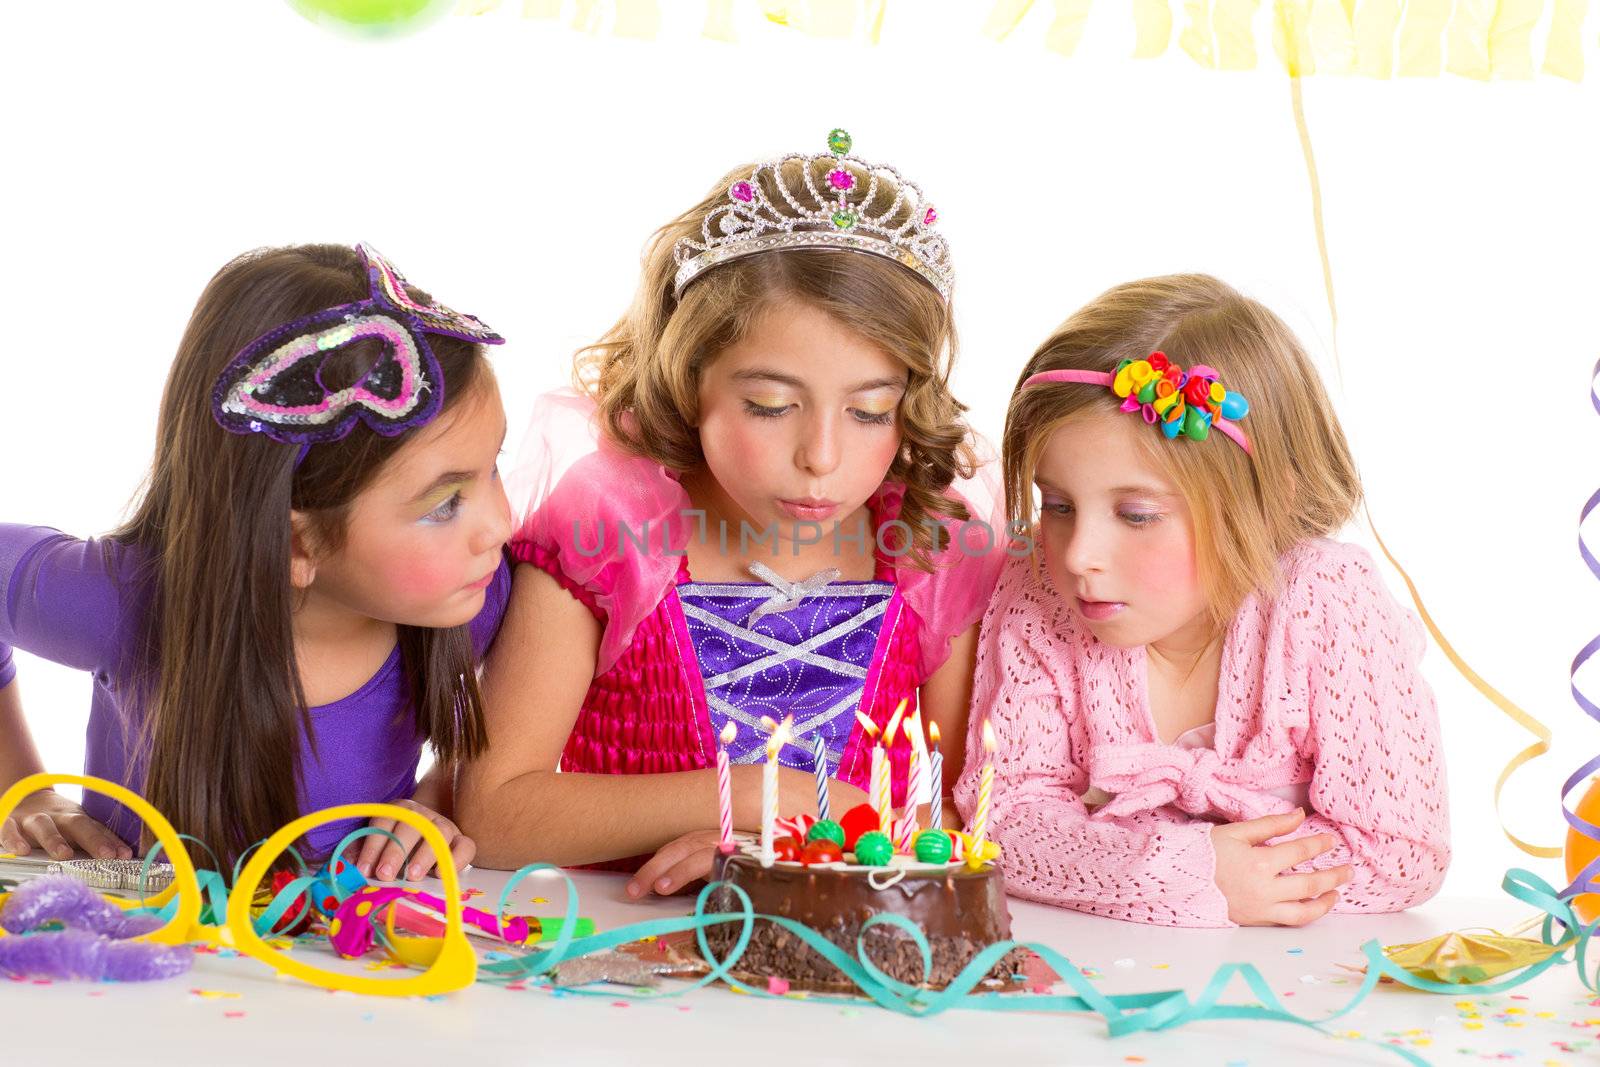 children happy girls blowing birthday party chocolate cake candles